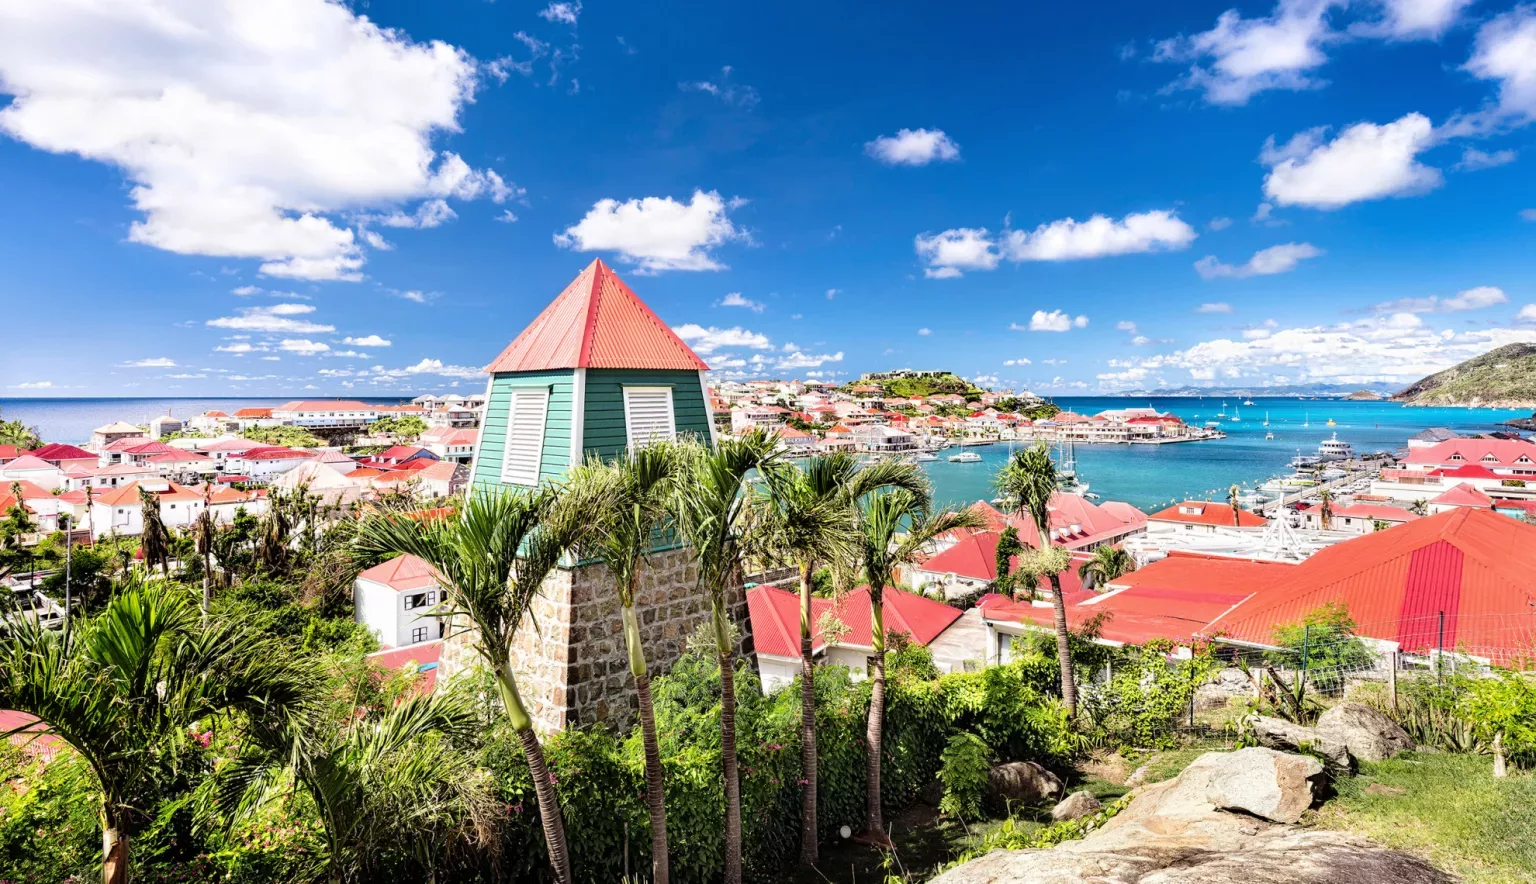 6 St. Barts Beaches You Need to Explore by Boat in 2019